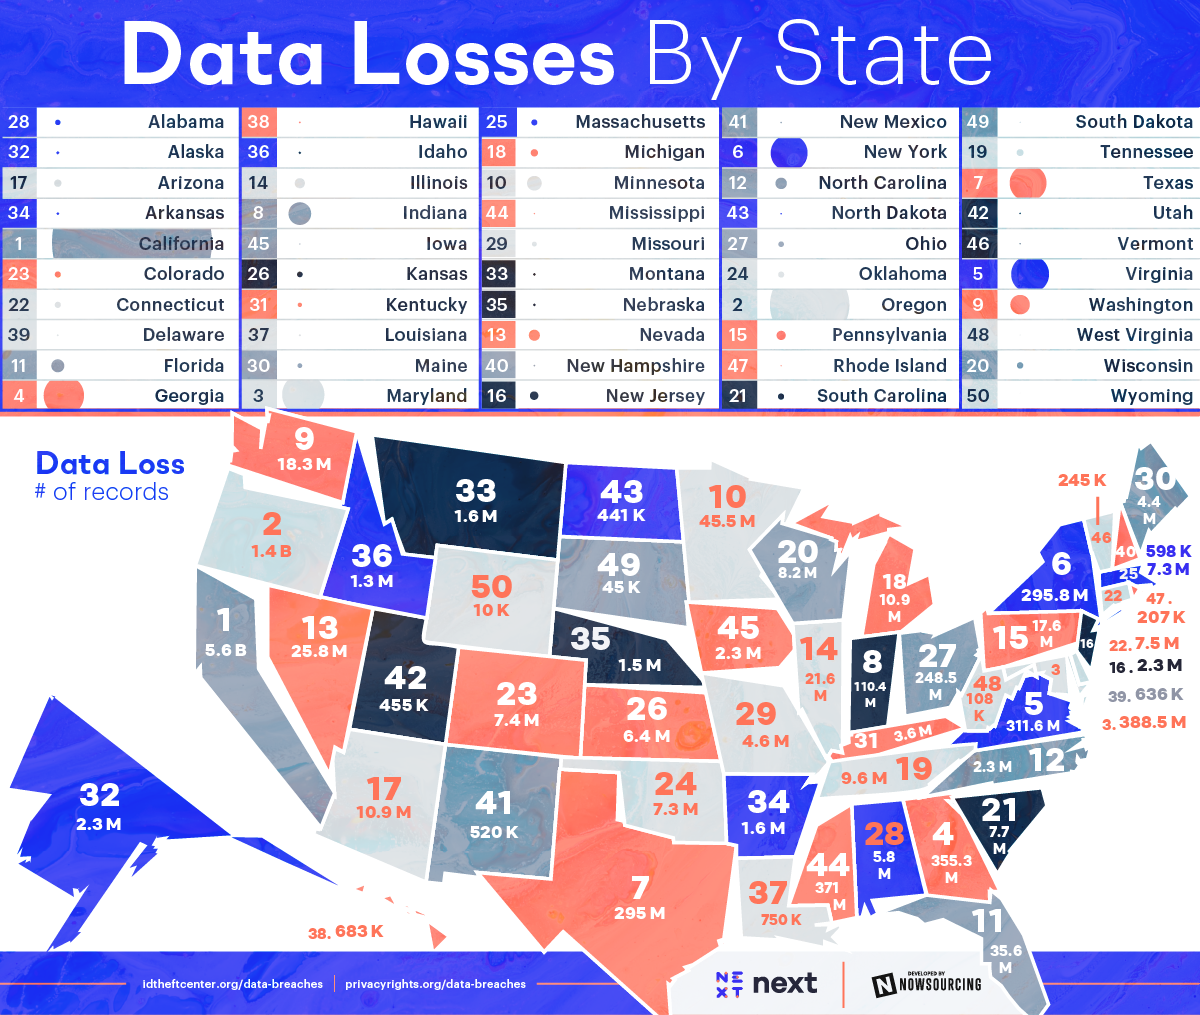 largest data losses by state